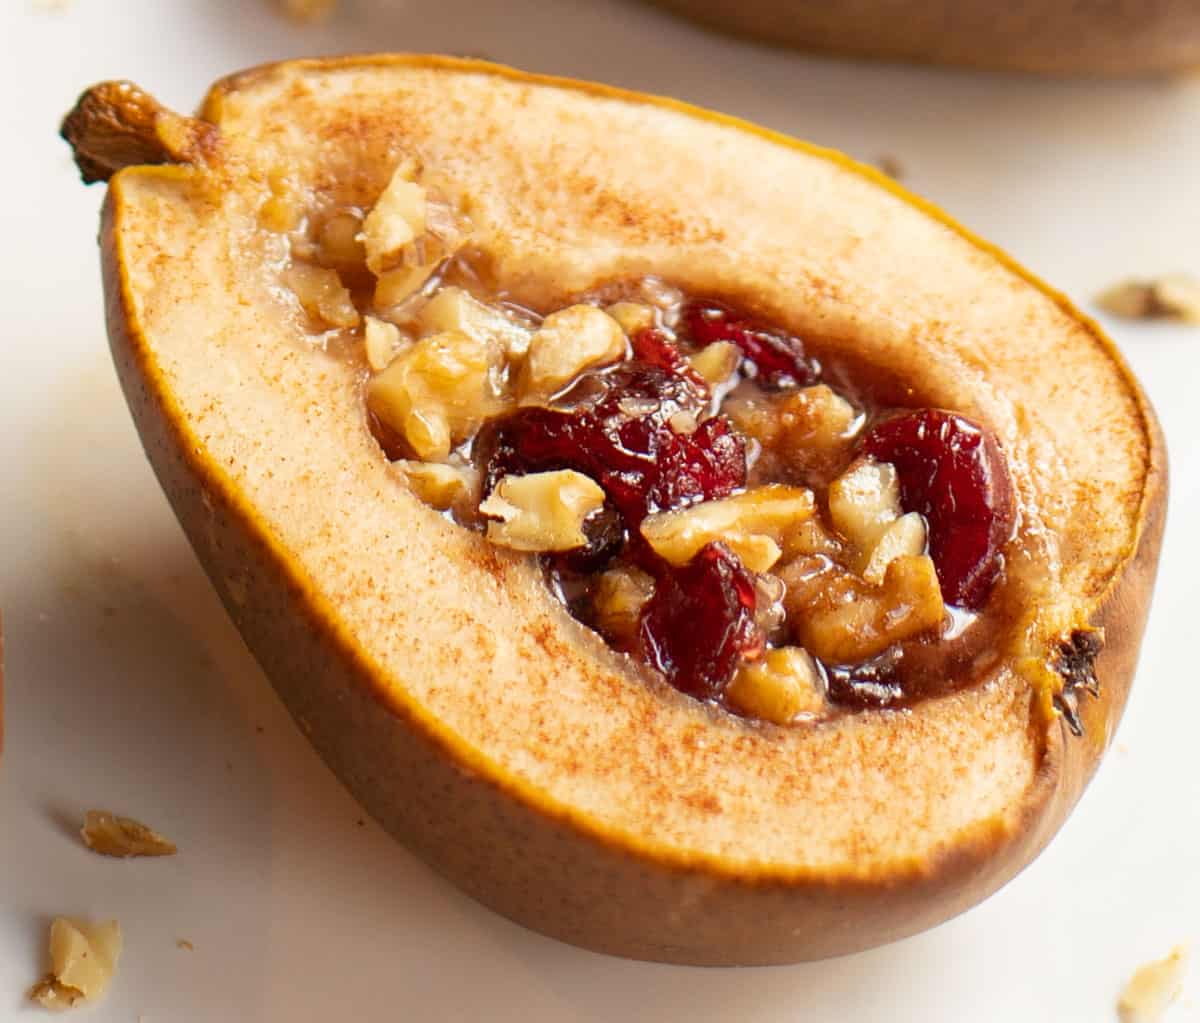 close up shot of a baked half pear stuffed with dried cranberries and chopped walnuts